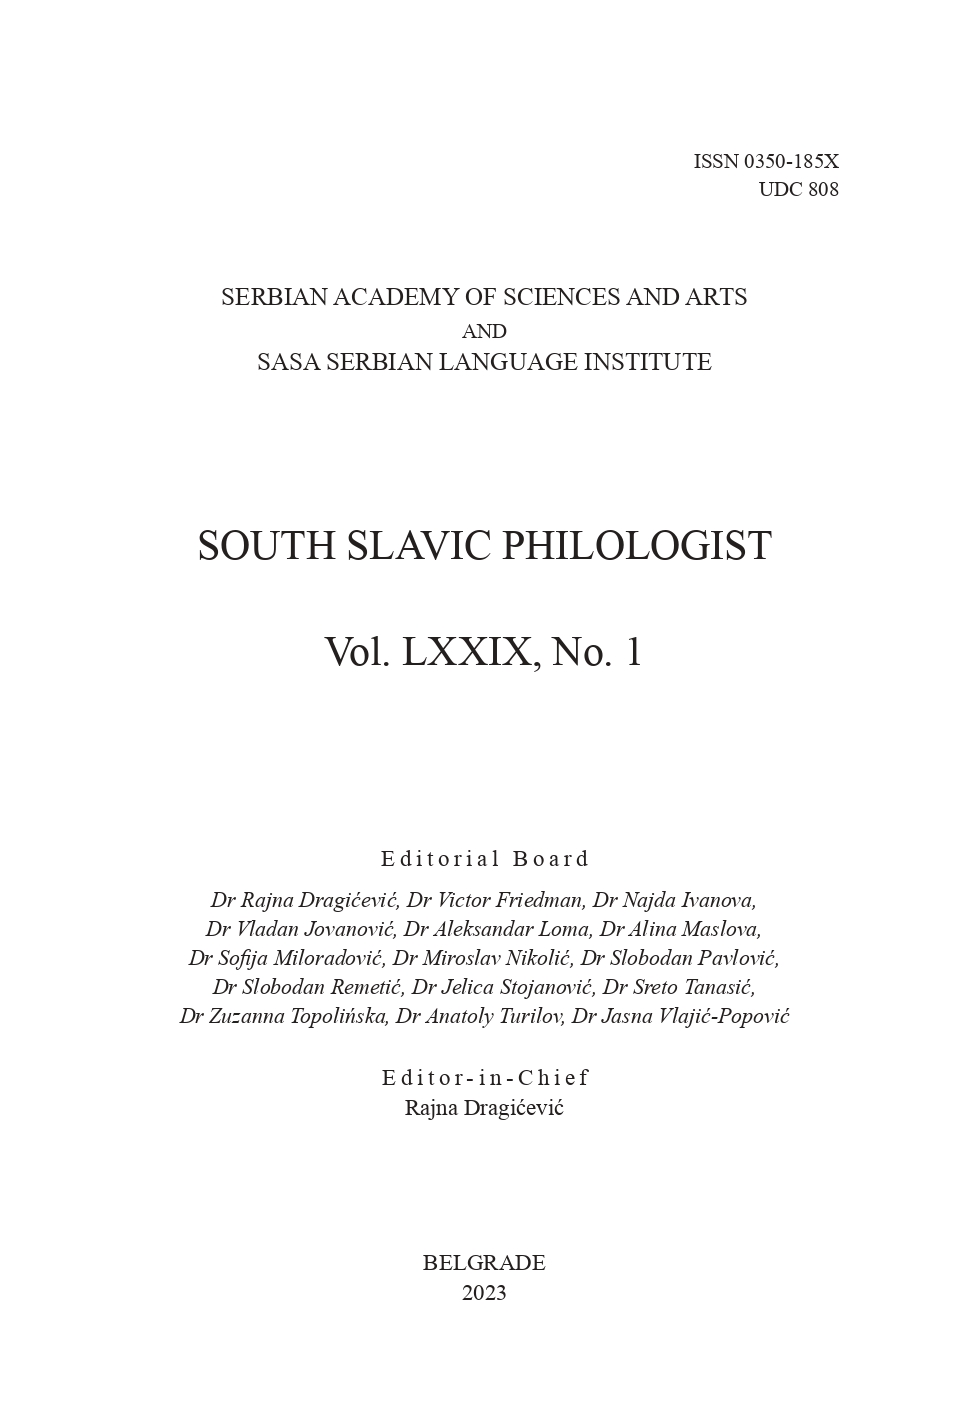 LINGUOCULTUROLOGICAL ASPECTS OF THE LEXEME CAT IN THE SERBIAN LANGUAGE Cover Image